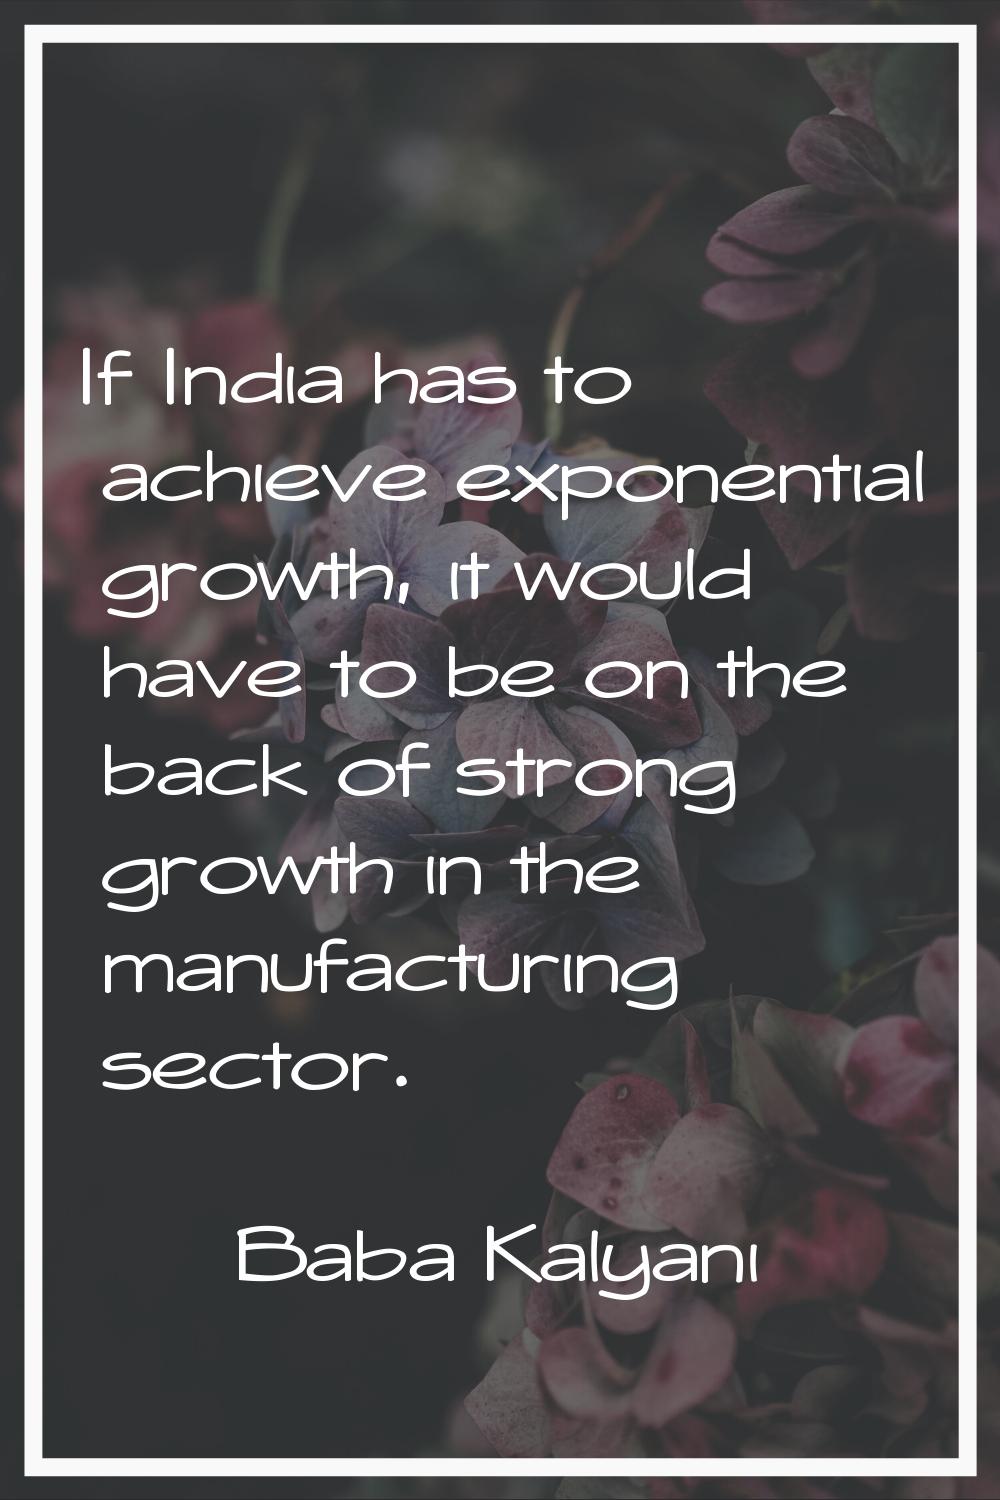 If India has to achieve exponential growth, it would have to be on the back of strong growth in the